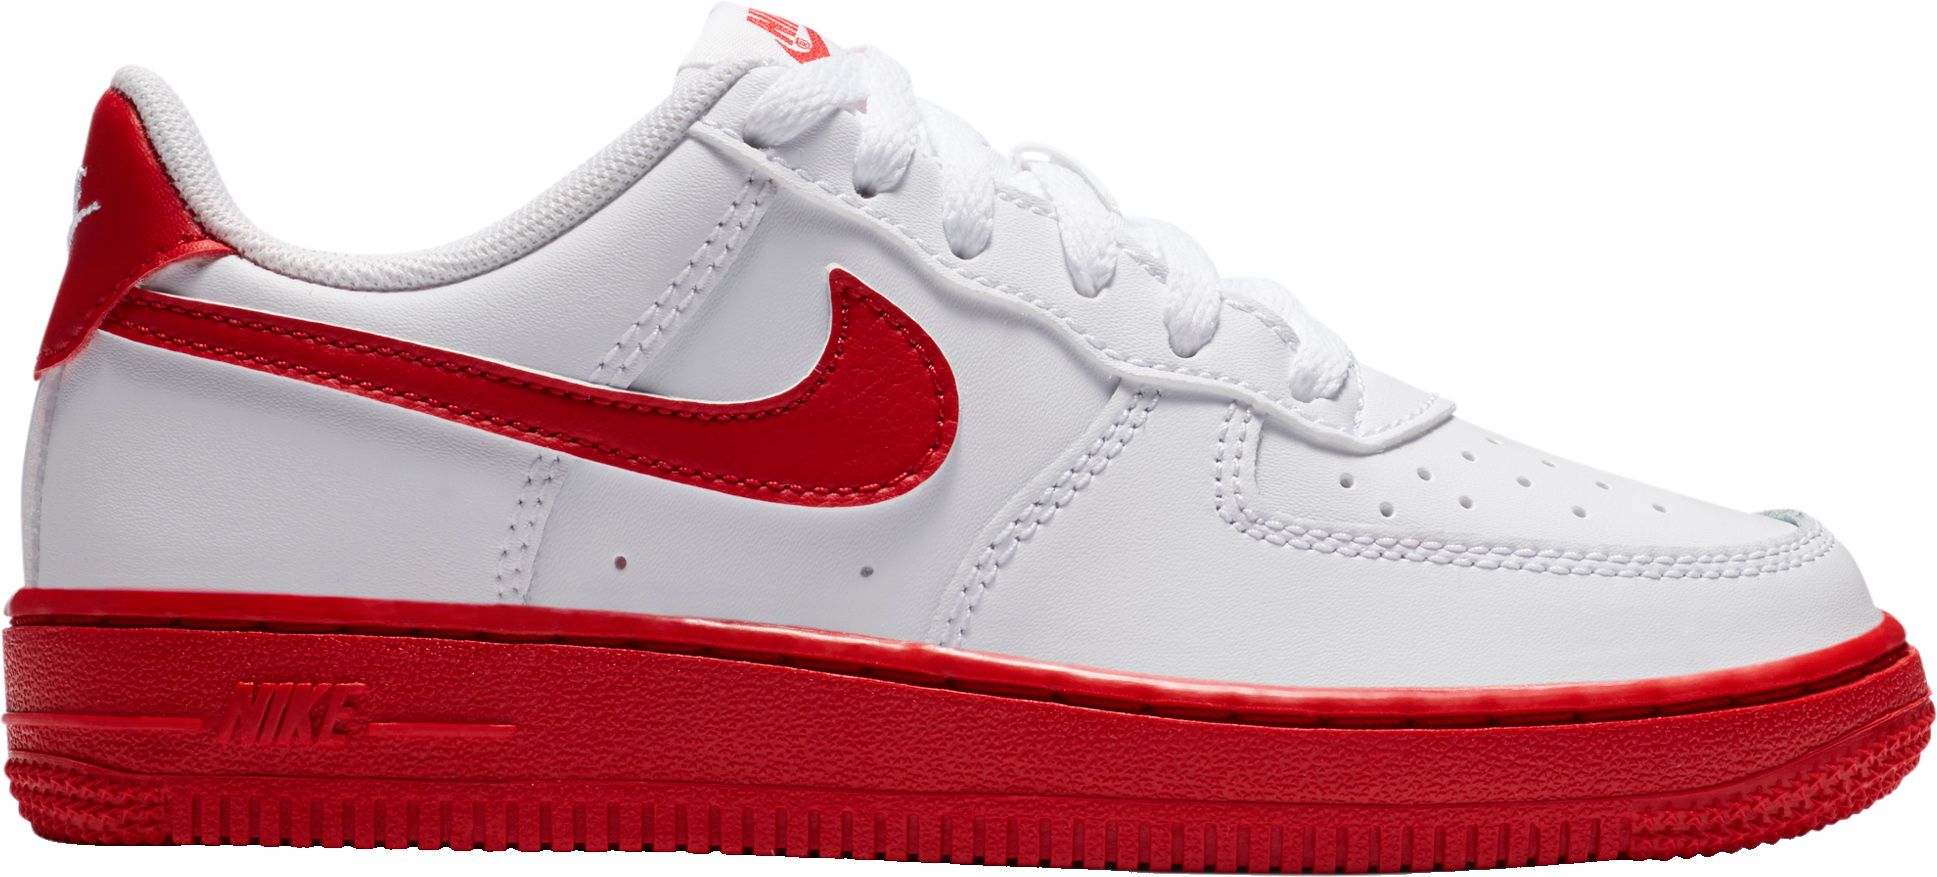 where can i find air force 1 shoes